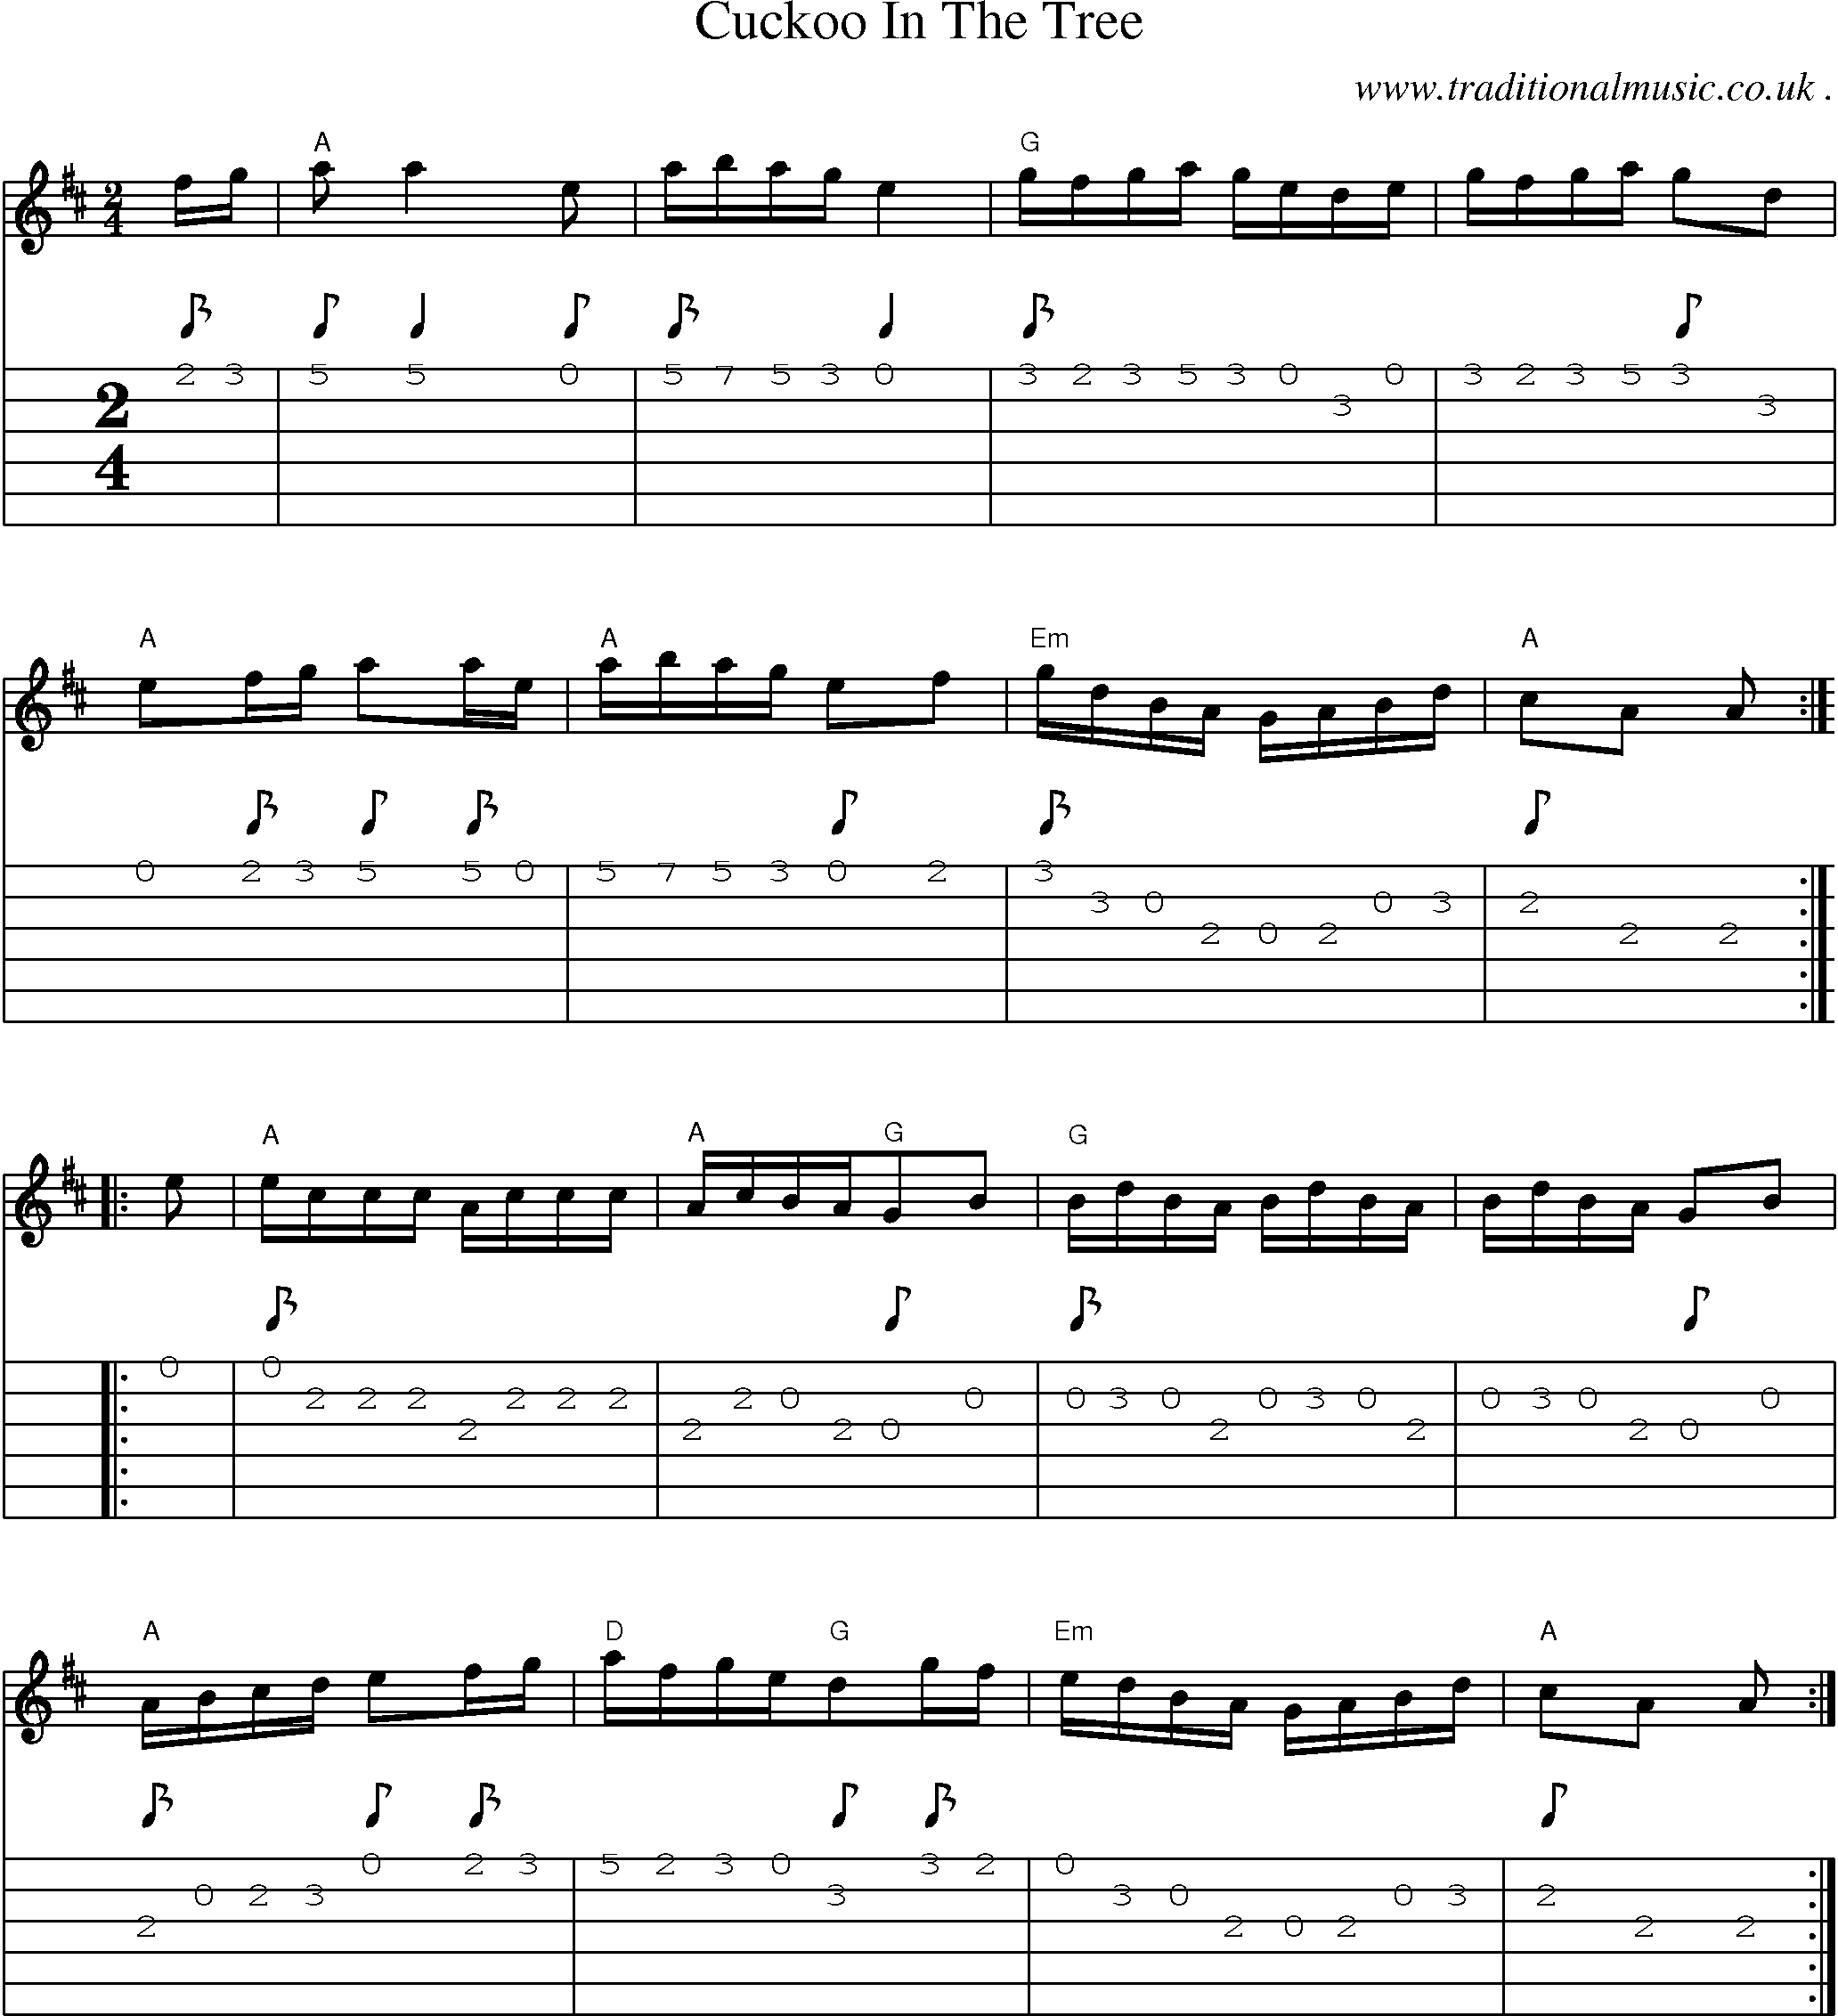 Sheet-Music and Guitar Tabs for Cuckoo In The Tree